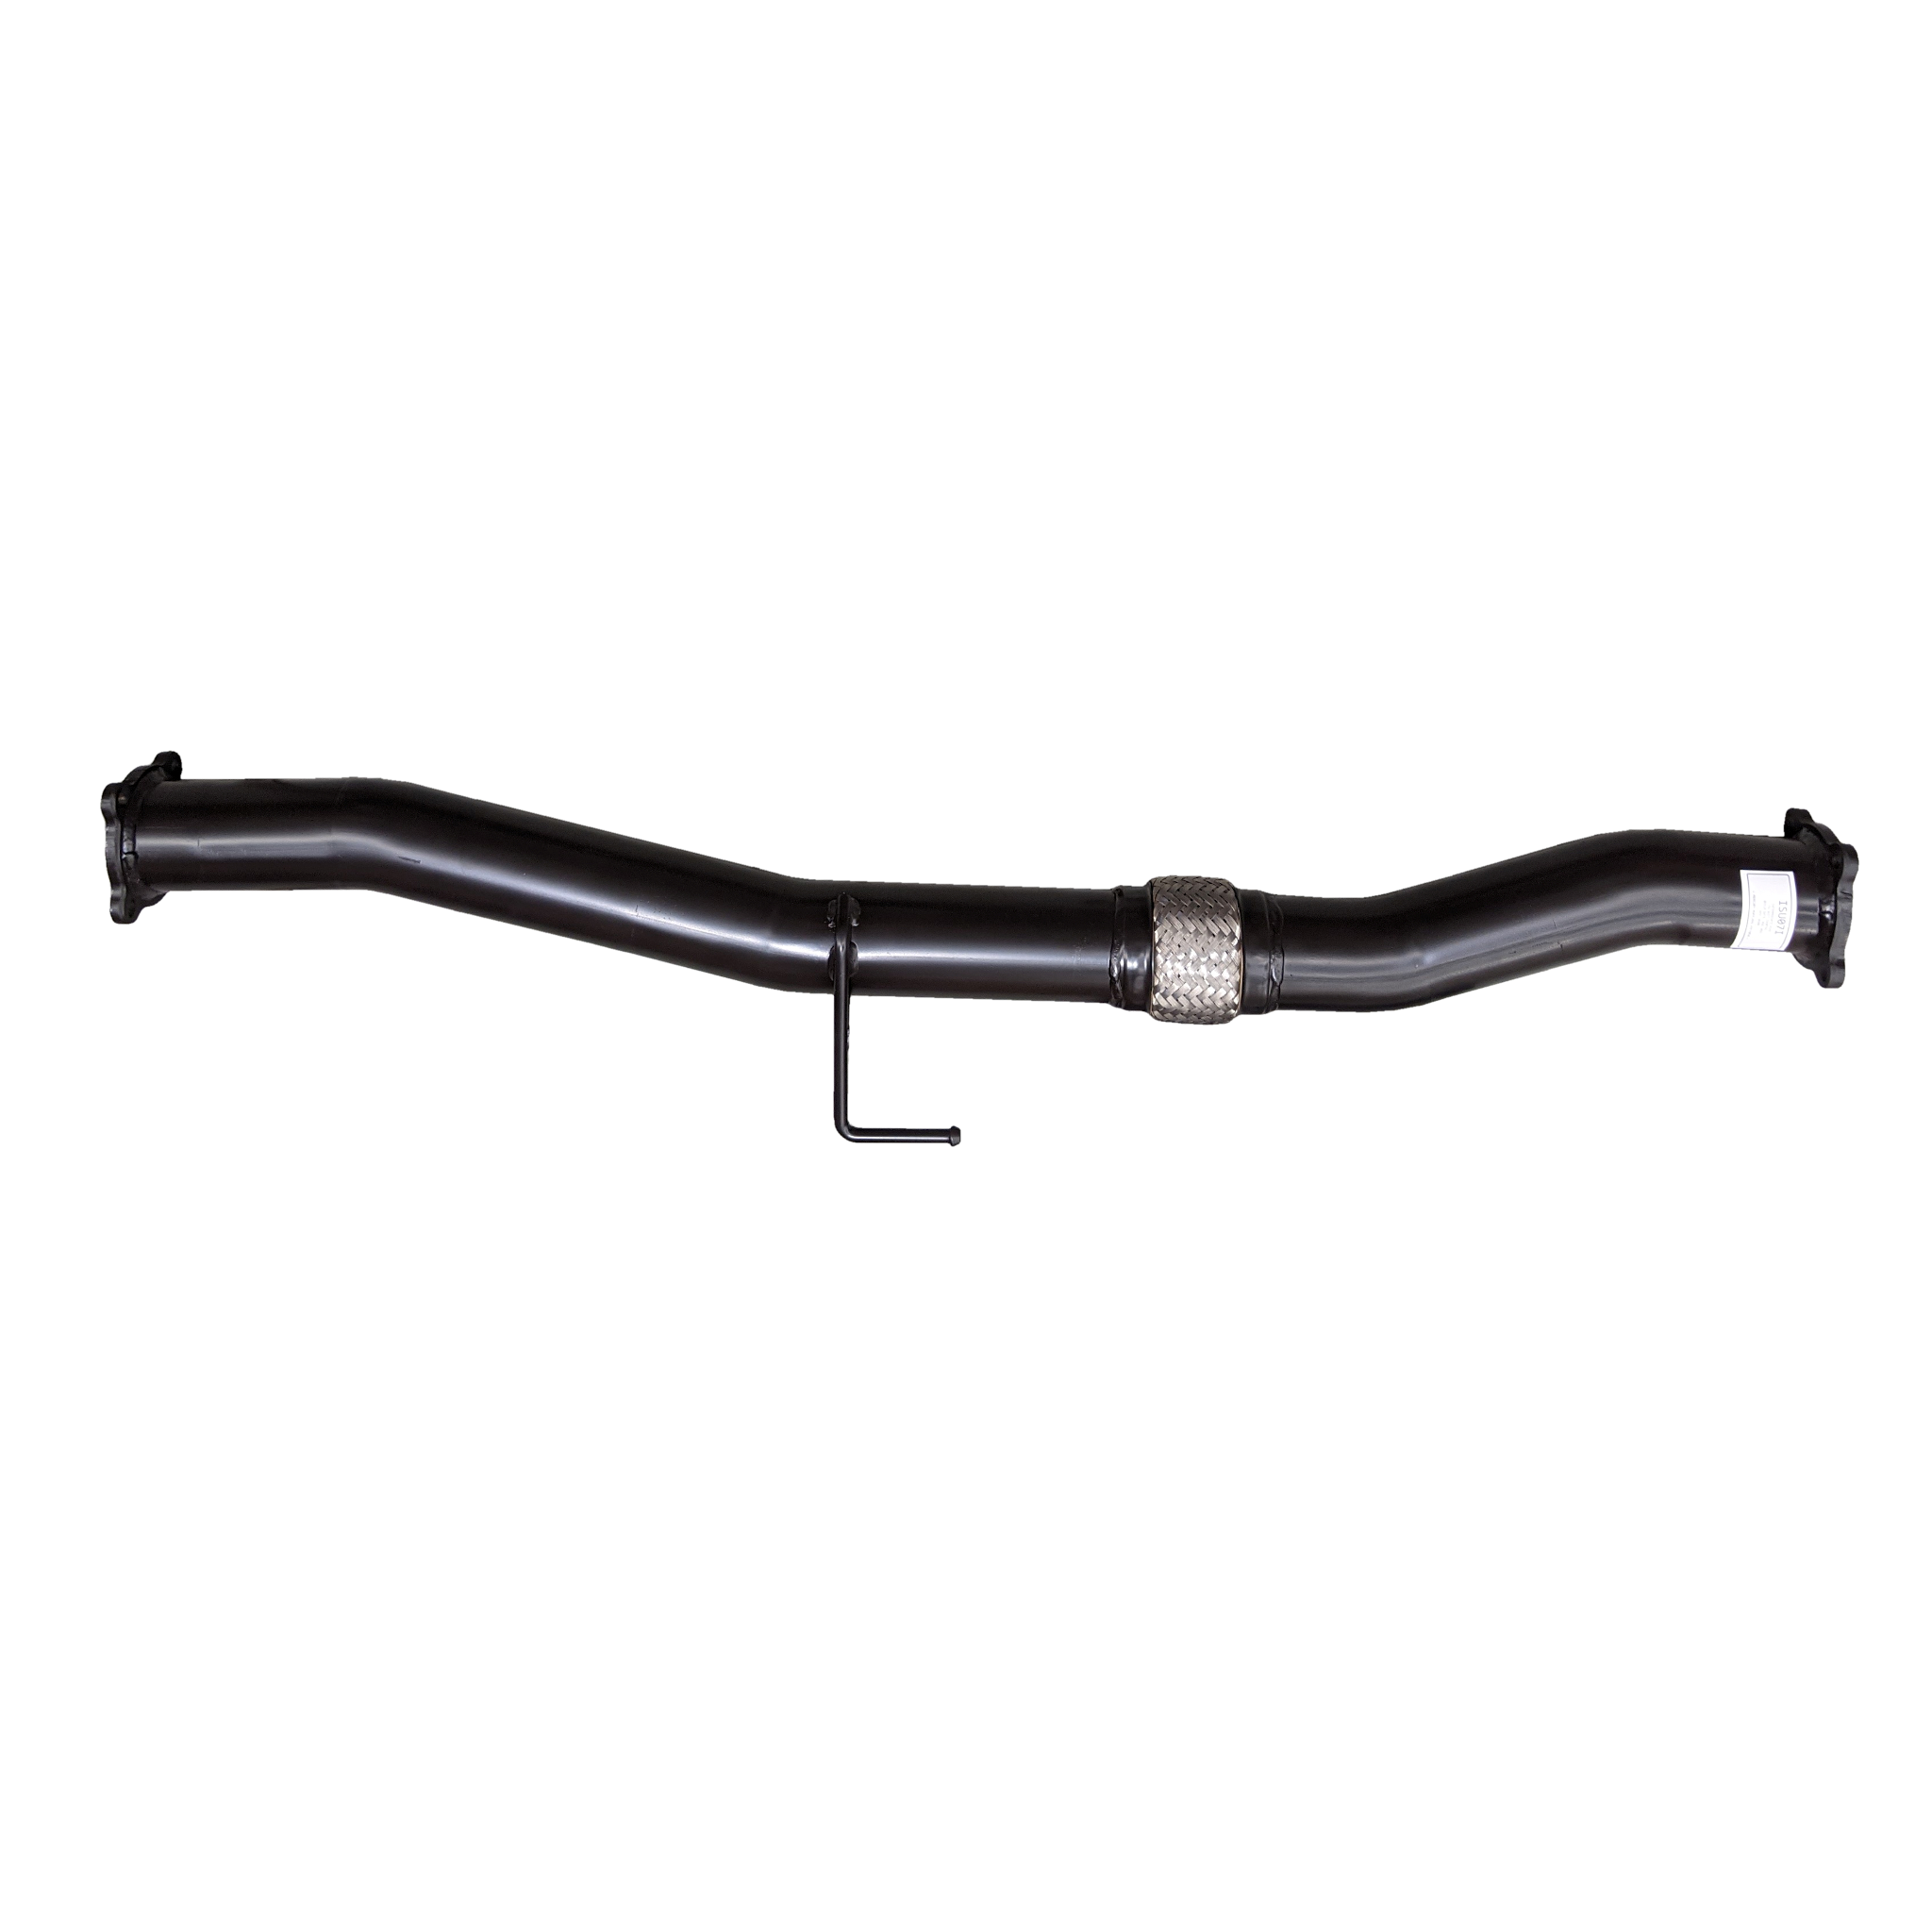 Isuzu D-Max 2wd & 4wd 3.0L 4 Cylinder Common Rail Turbo Diesel Trayback 07/2020 - On - DPF Back Exhaust System